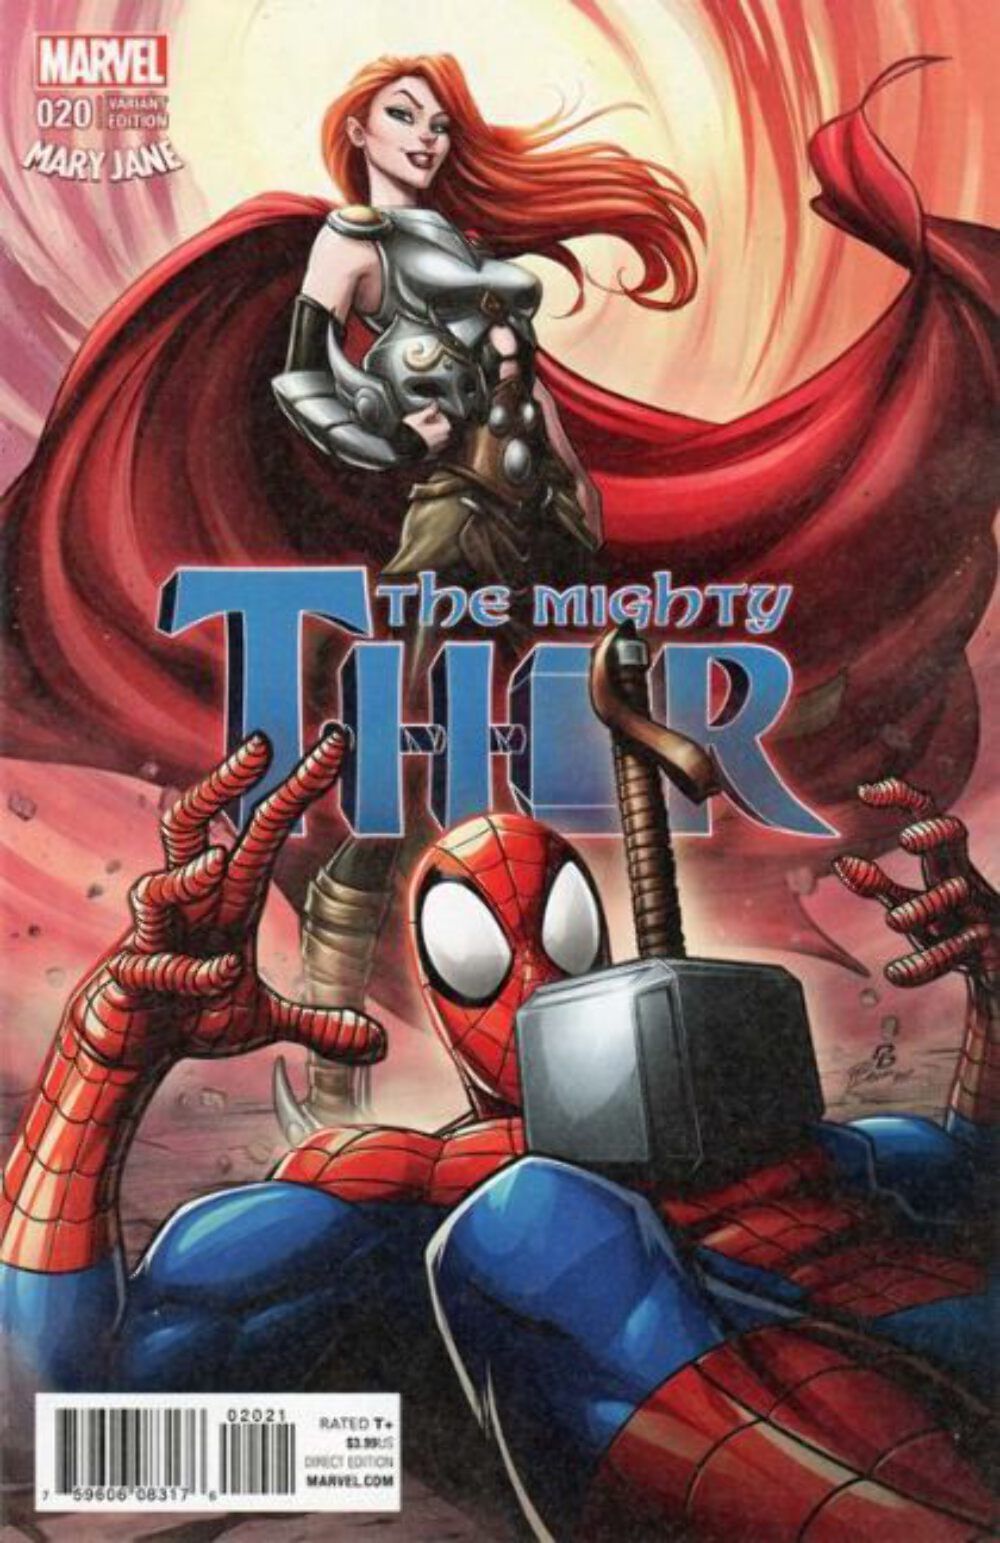 Mighty Thor #20 Patrick Brown Mary Jane Variant Cover comic